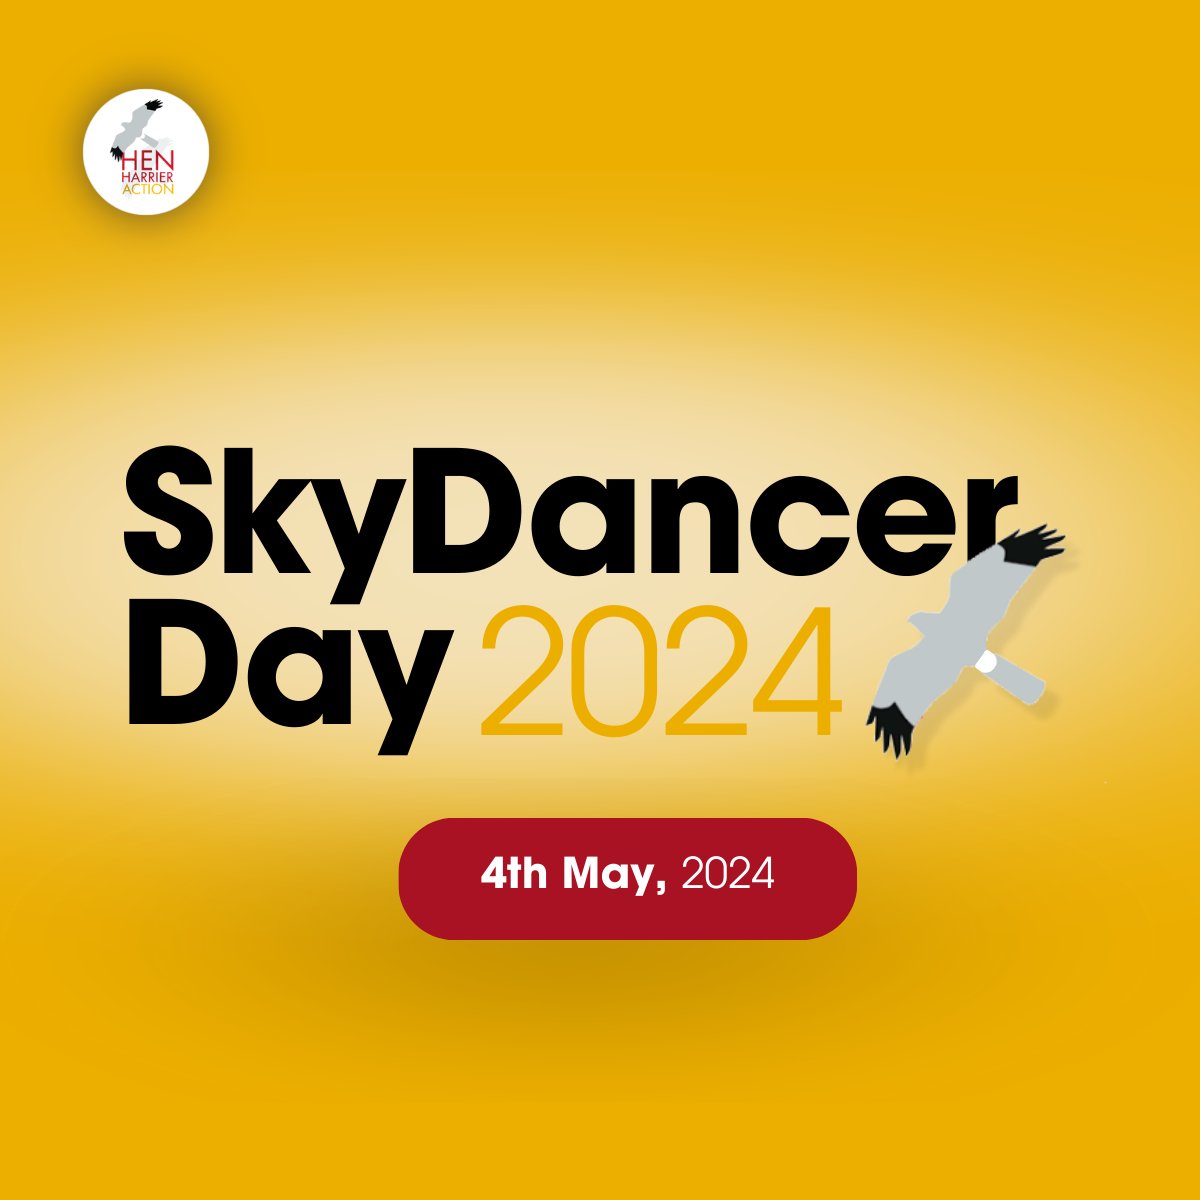 It's here!  Hen Harrier Action's #SkydancerDay2024 is LIVE NOW from RSPB Insh Marshes!  

Join us on YouTube for a Livestream programme celebrating these amazing birds & upland conservation stories conservation. 

📺11.00 am (BST), 4th May

➡️Watch Now: youtube.com/watch?v=kNnVDd…